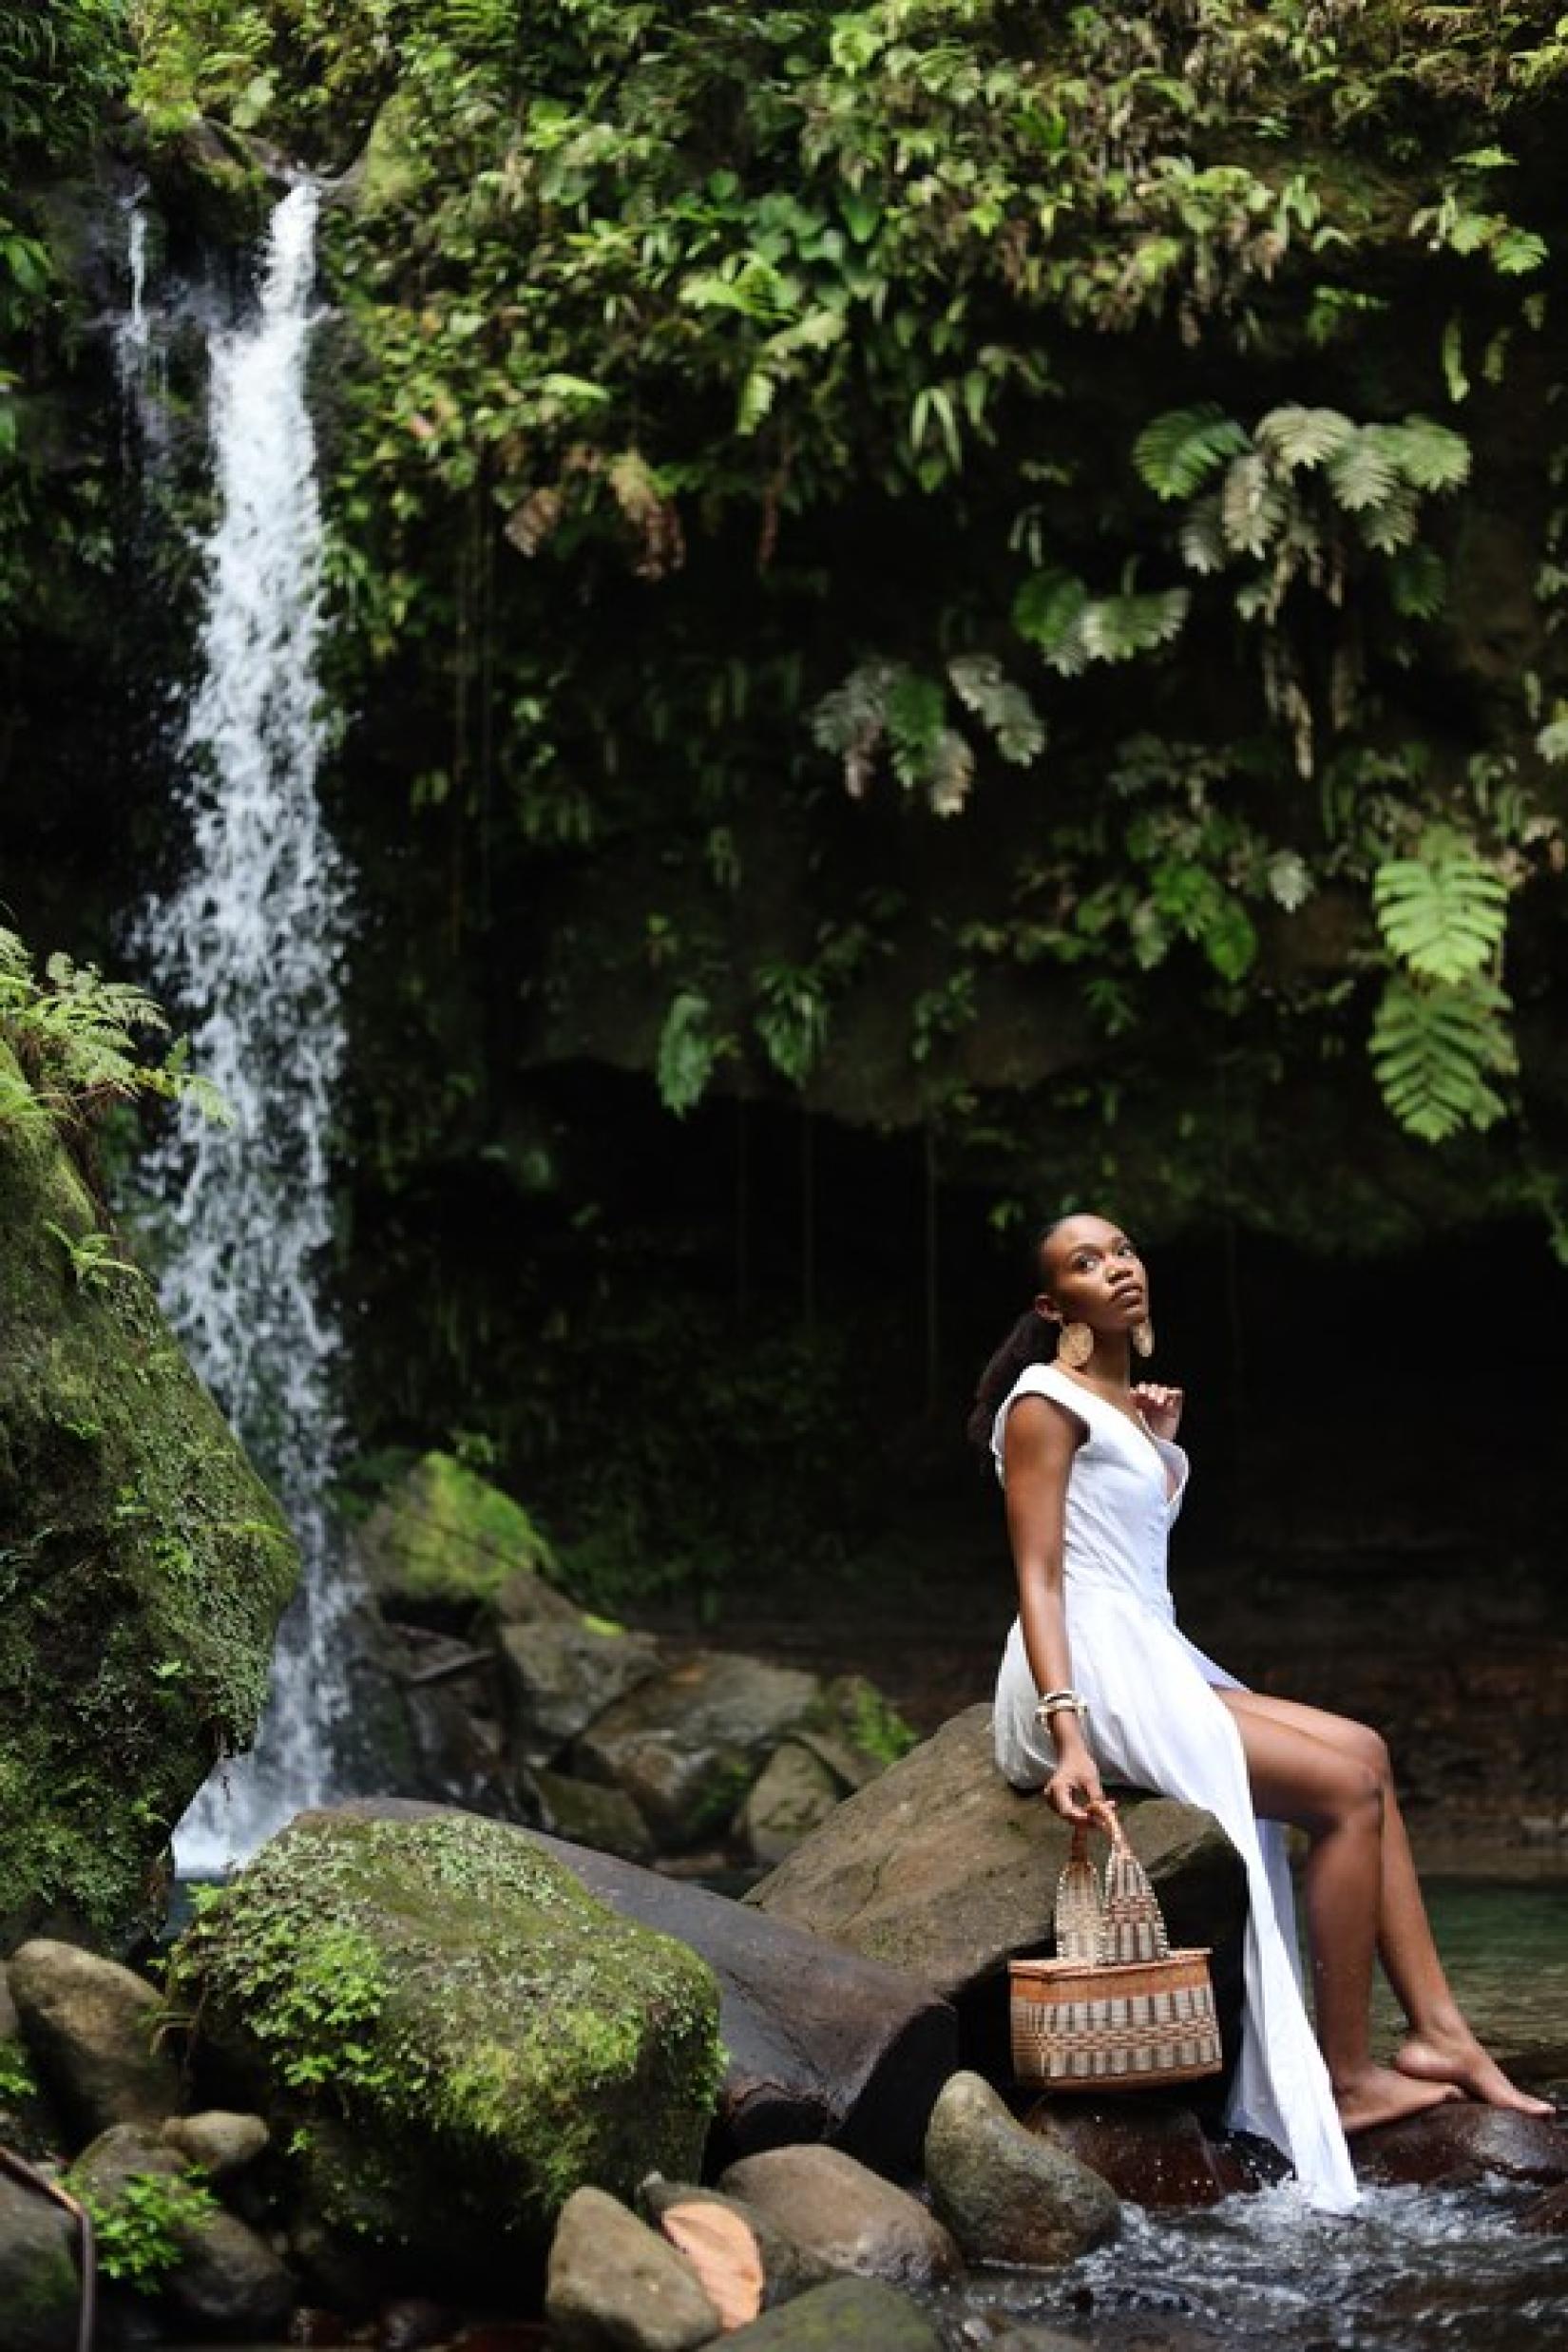 A woman sitting on a rock near a waterfall in a fashionable pose, with a white dress, and styled handbag